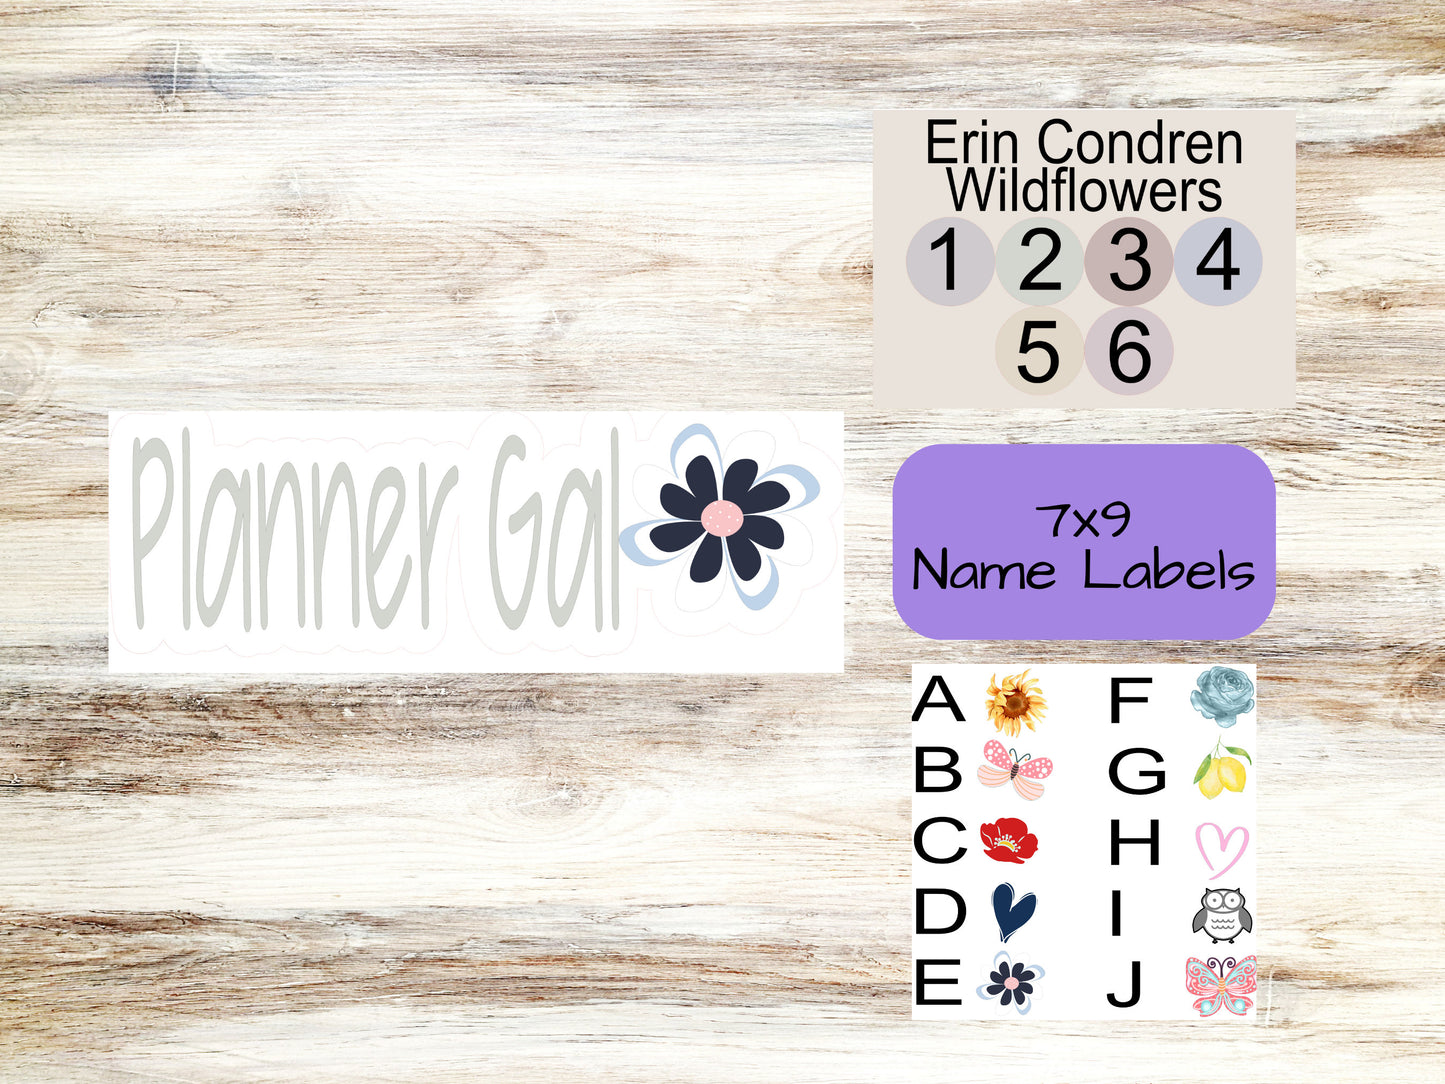 7x9 Wildflower Daily Name Label || Name Decal for Wildflower || Planner Decals || Planner Name Decals